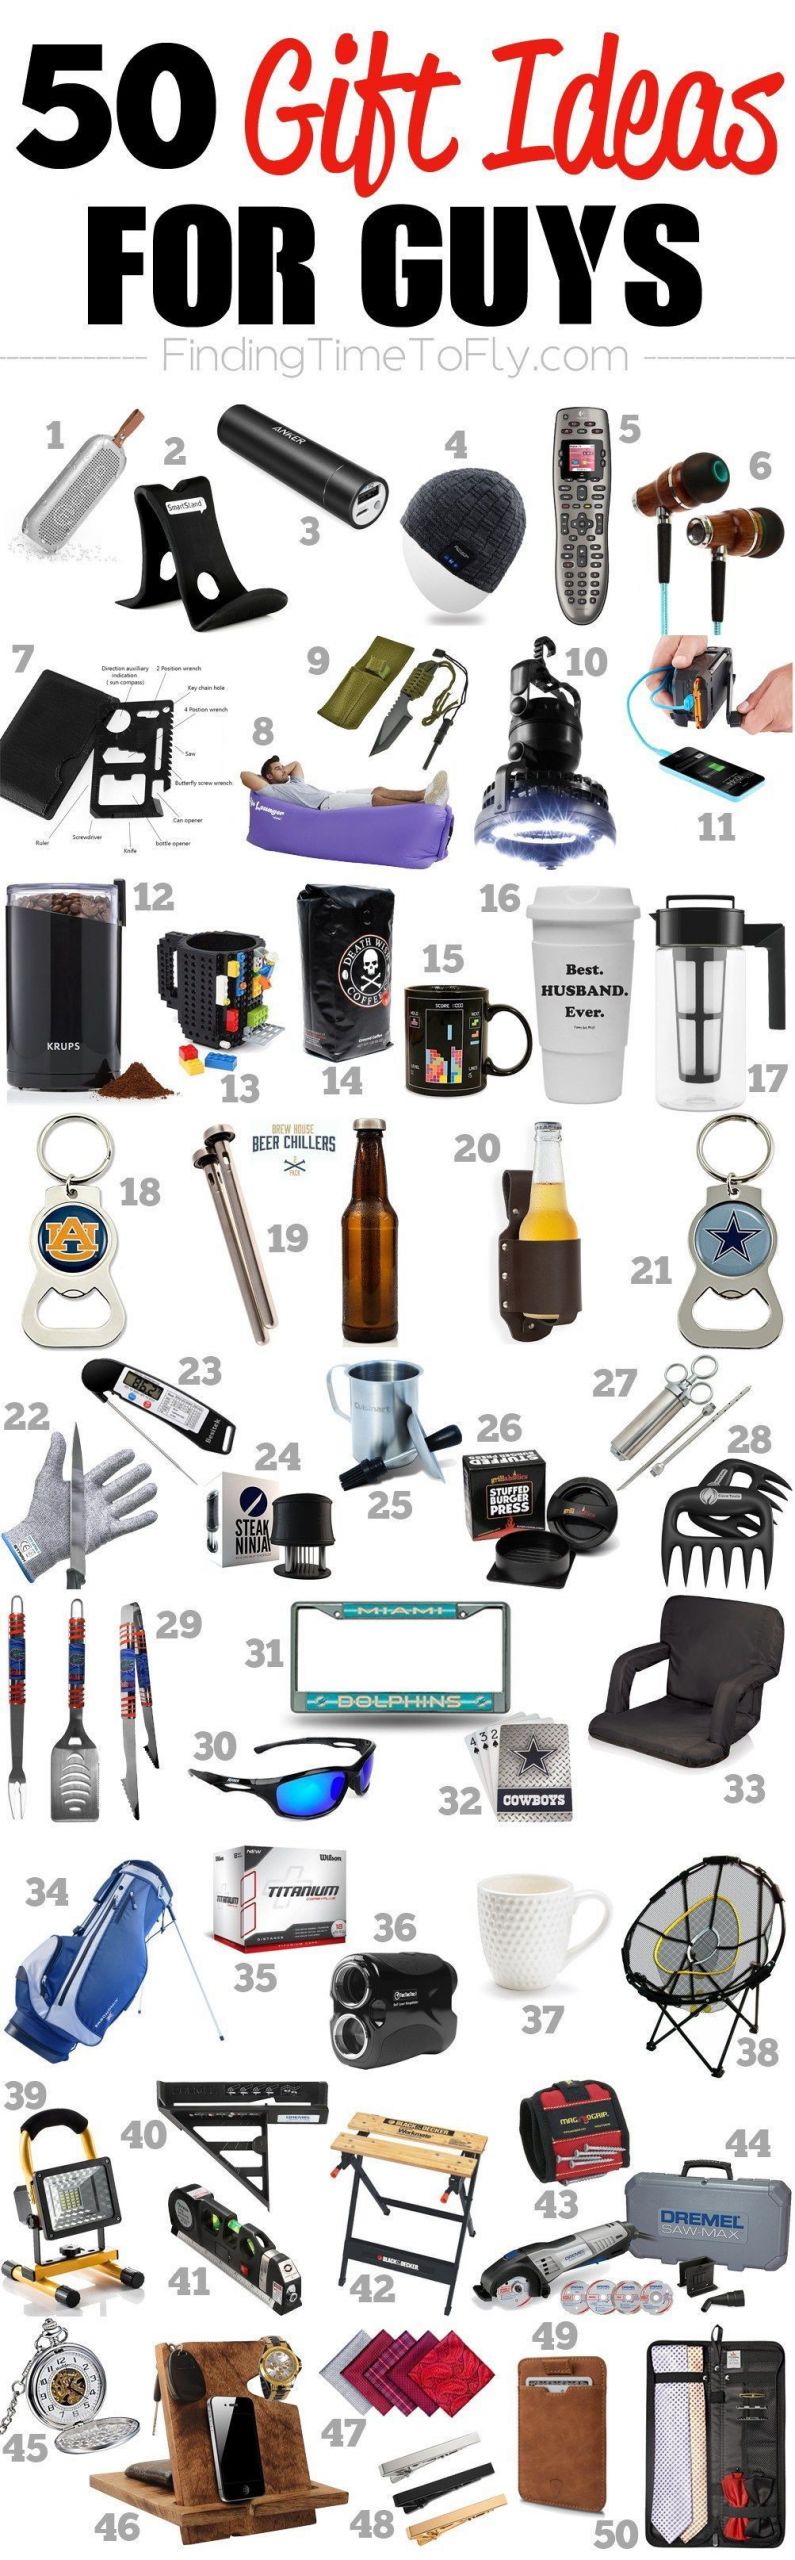 Cool Birthday Gifts For Guys
 Saving this list of 50 Gifts for Guys A great list of